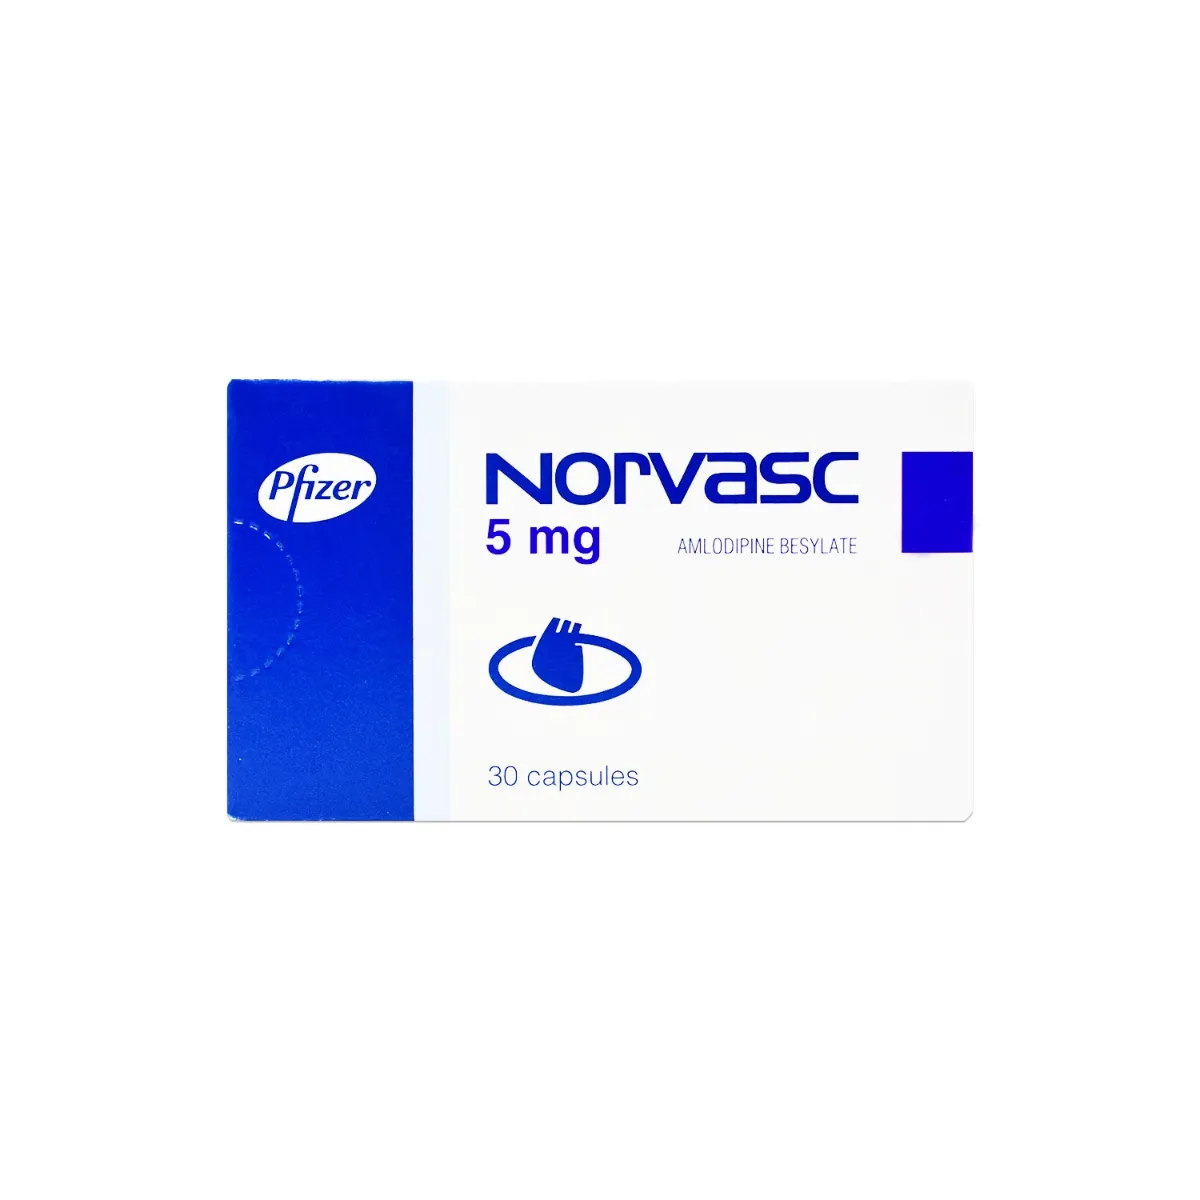 Norvasc 5mg, 30 comprimate, Pfizer 